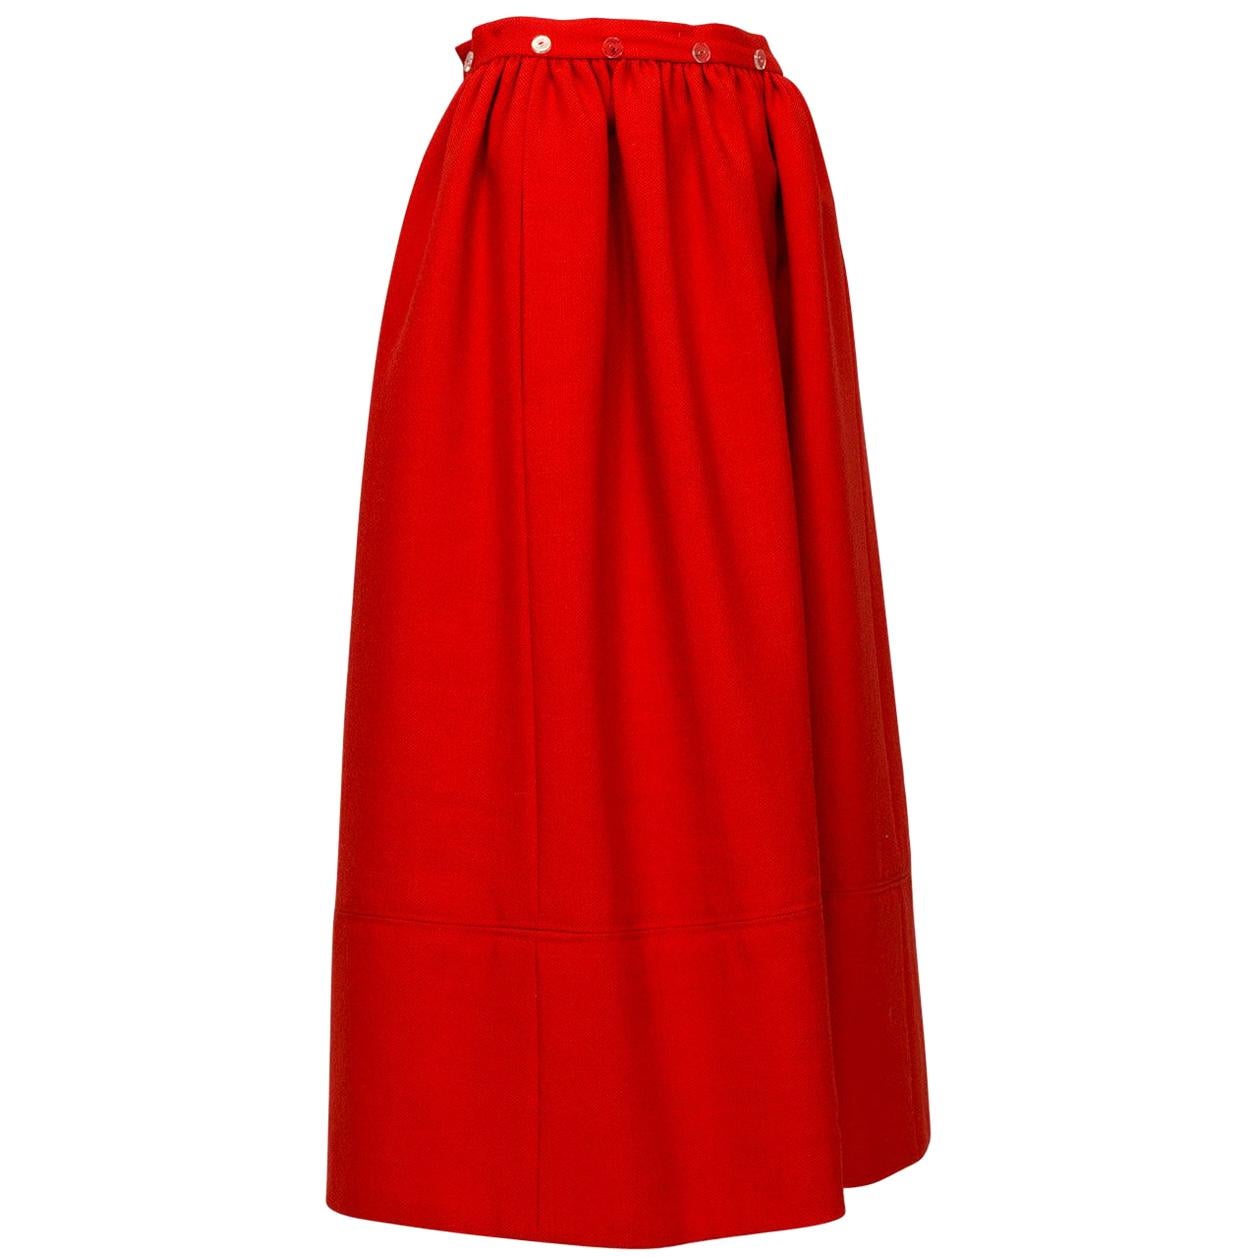 Norman Norell Heavyweight Red Gathered Hostess Skirt - Small, 1960s